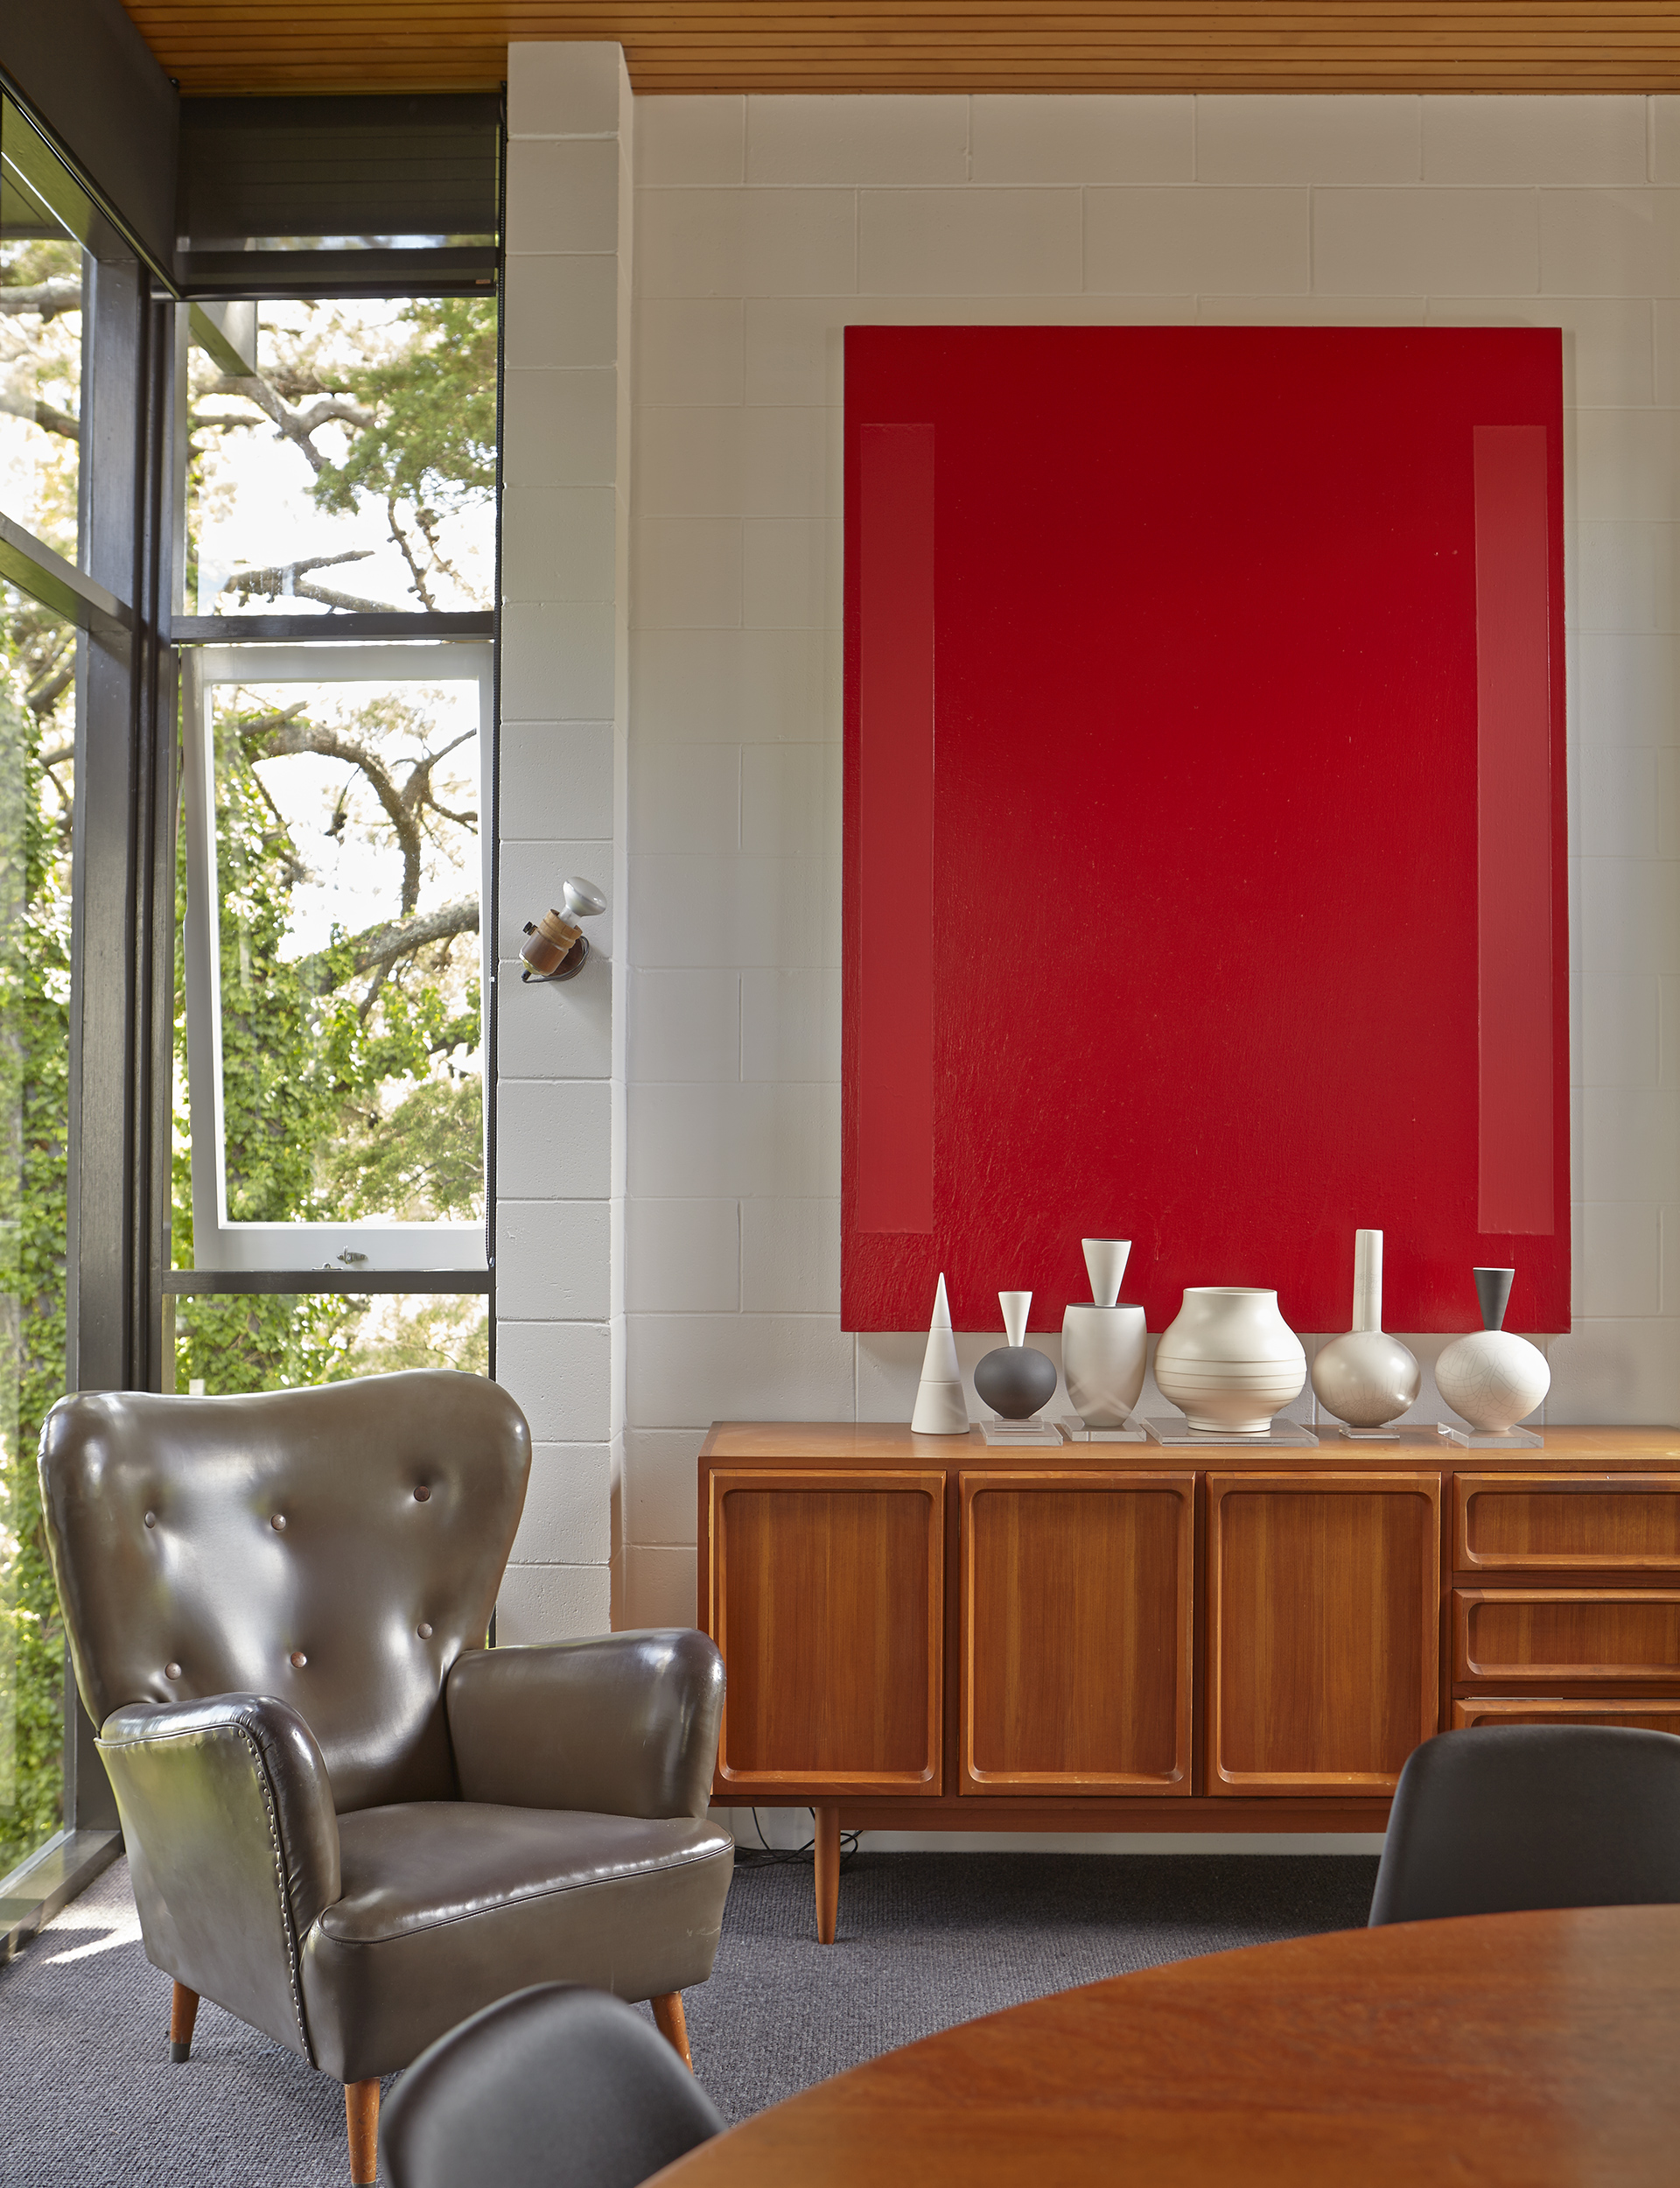 Max Gimblett’s ‘Crimson / Red’ hangs over a mid-century buffet by Parker Furniture, with vases by Peter Collis, John Parker and Keith Murray. Dean and Bentley bought the Australian mid-century wingback armchairs in their original vinyl from Bondi markets in Sydney.